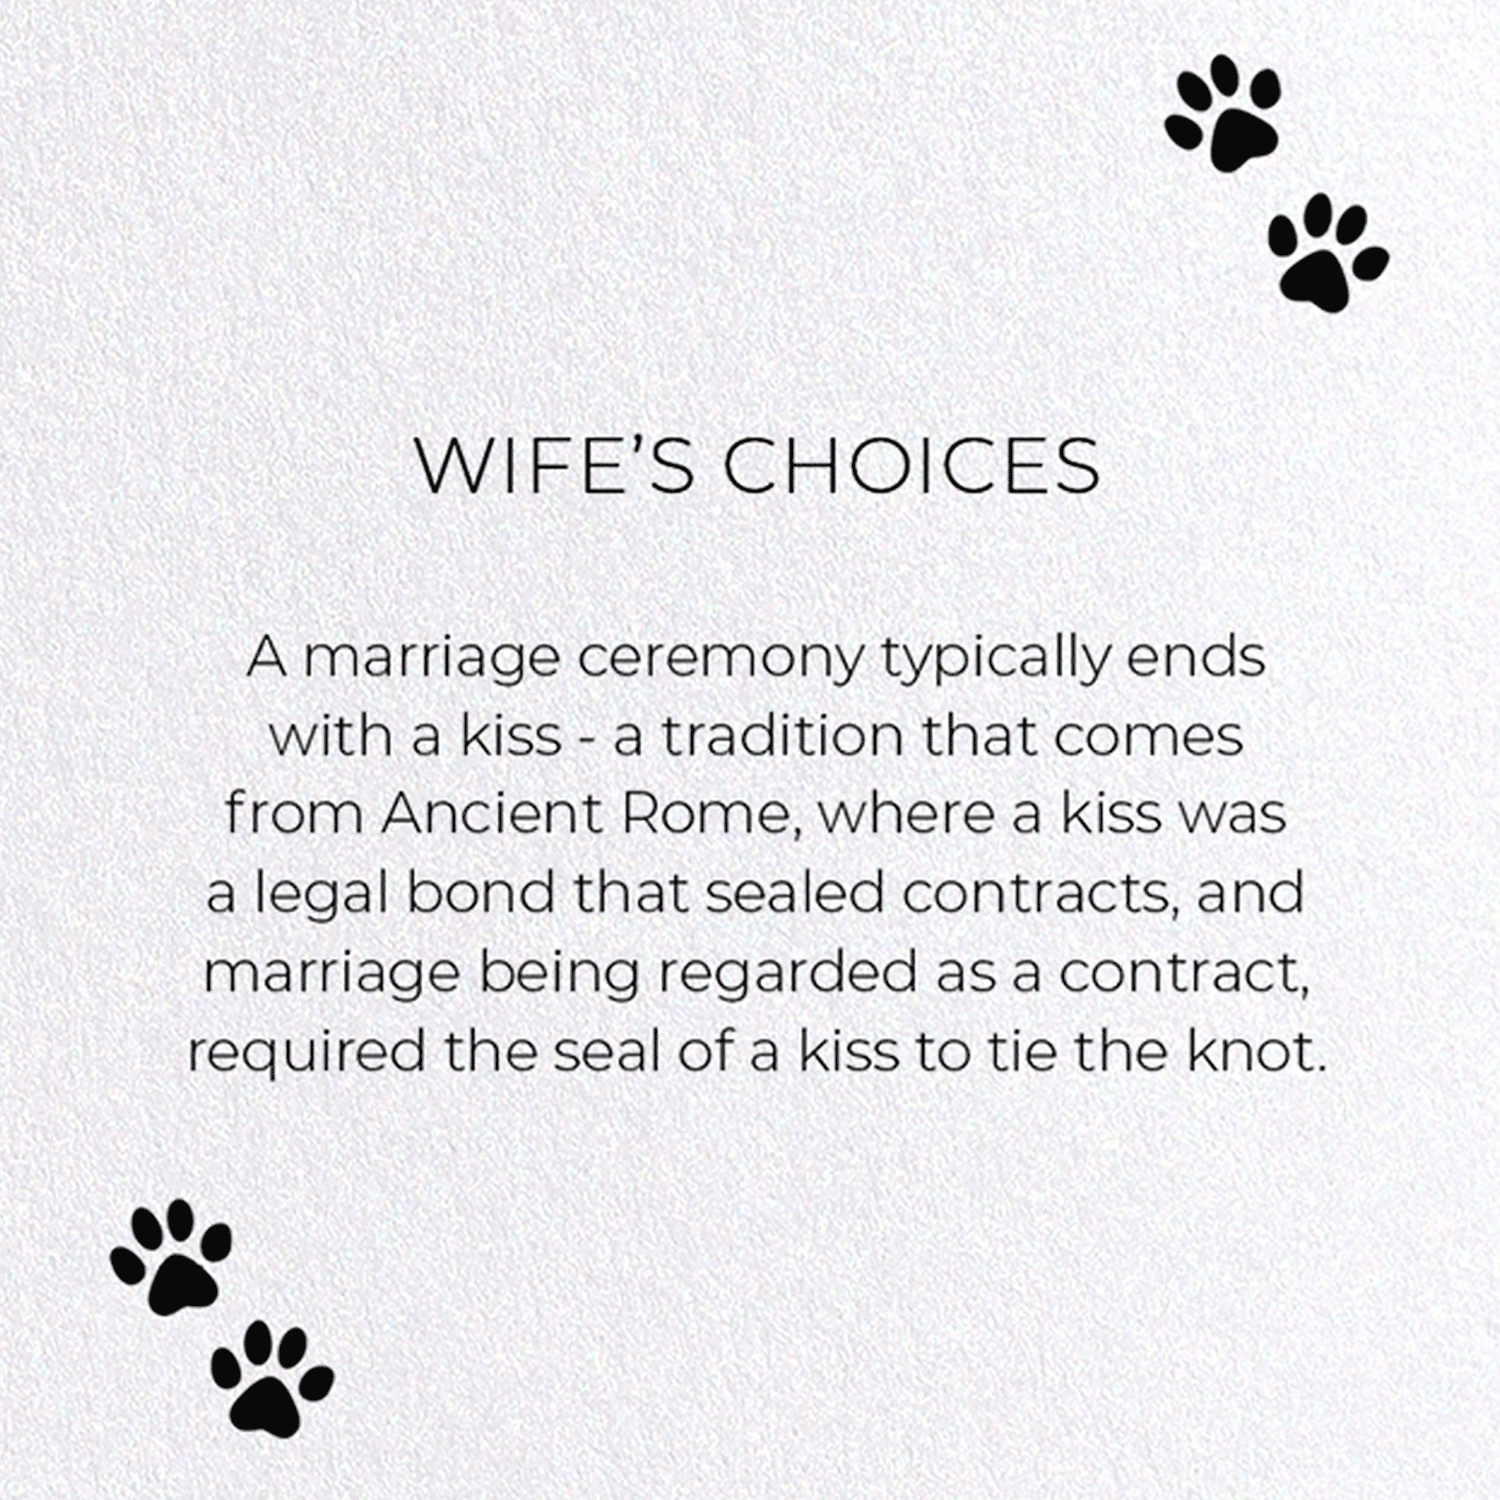 WIFE'S CHOICES: Funny Animal Greeting Card